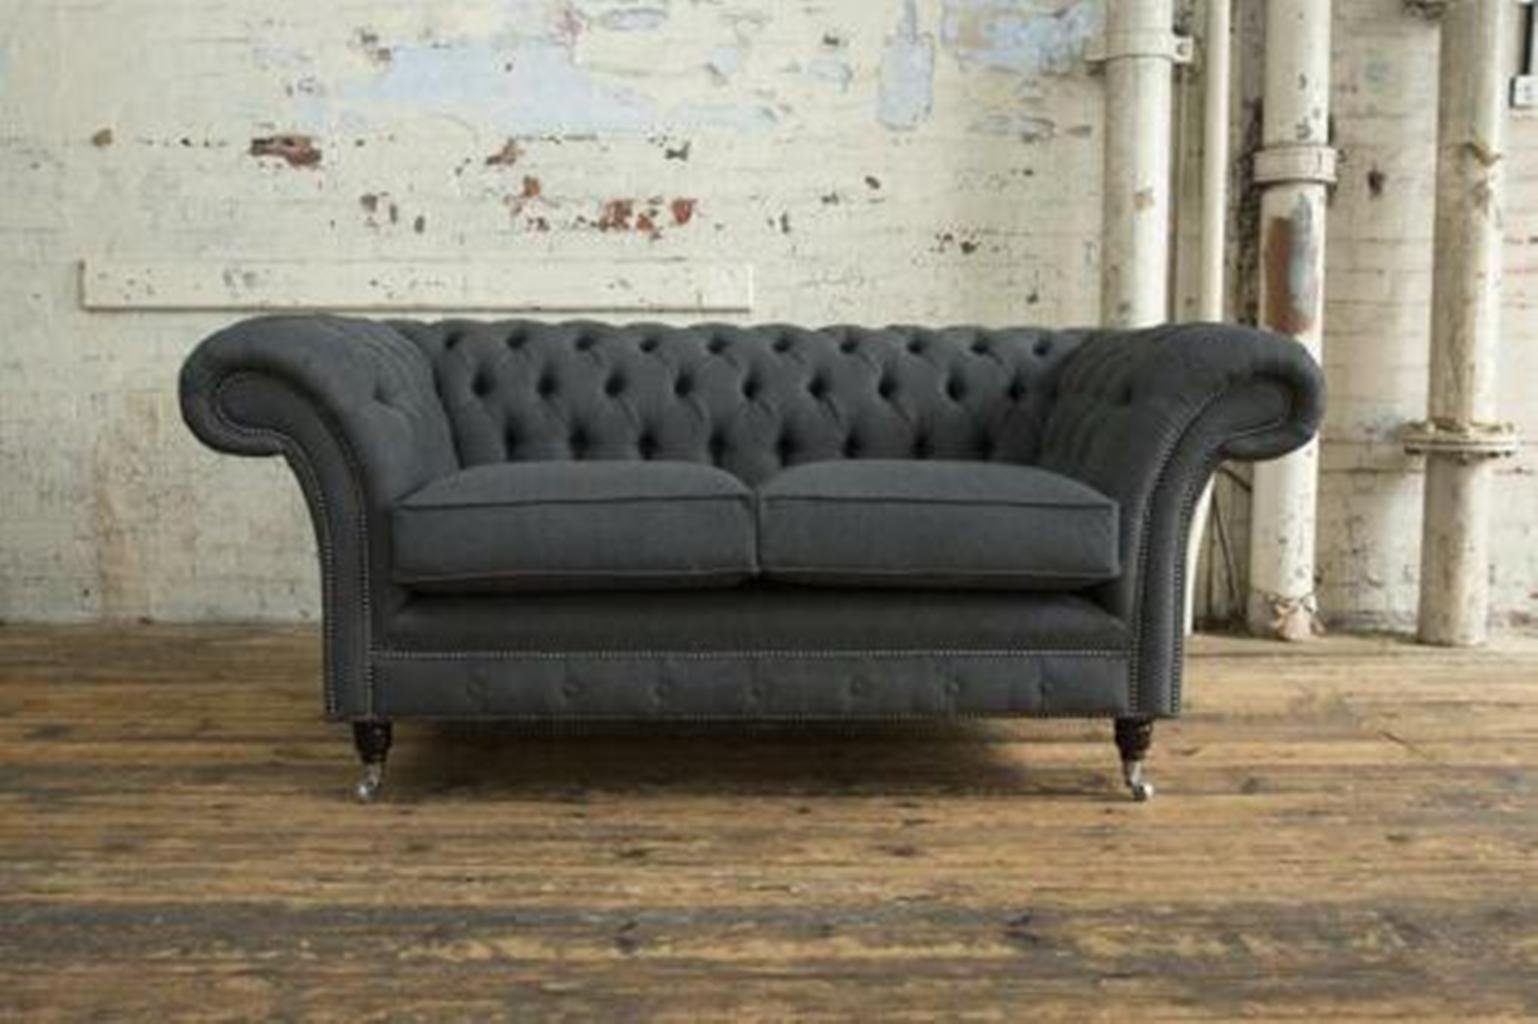 JVmoebel Chesterfield-Sofa, Luxus 2 Sitzer Couch Polster Sofa Textil Stoff Couchen Chesterfield | Chesterfield-Sofas